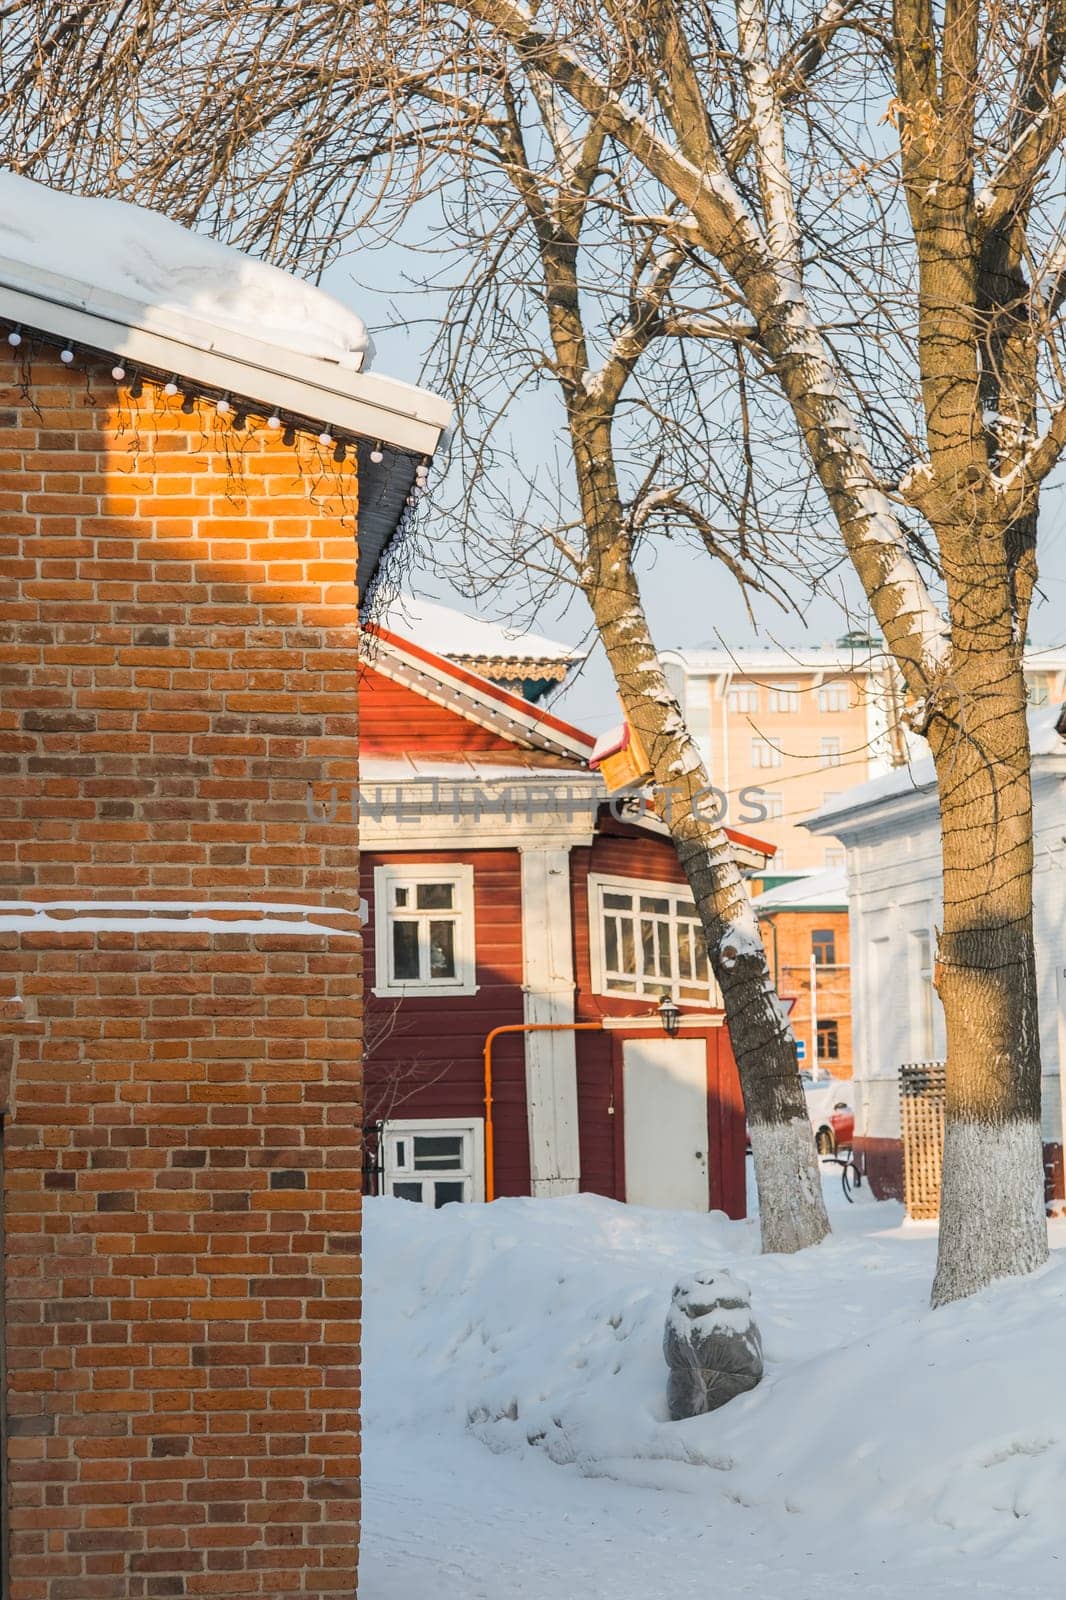 Exterior design of wooden red cottage in snowy town. Winter street with small buildings cold season in city